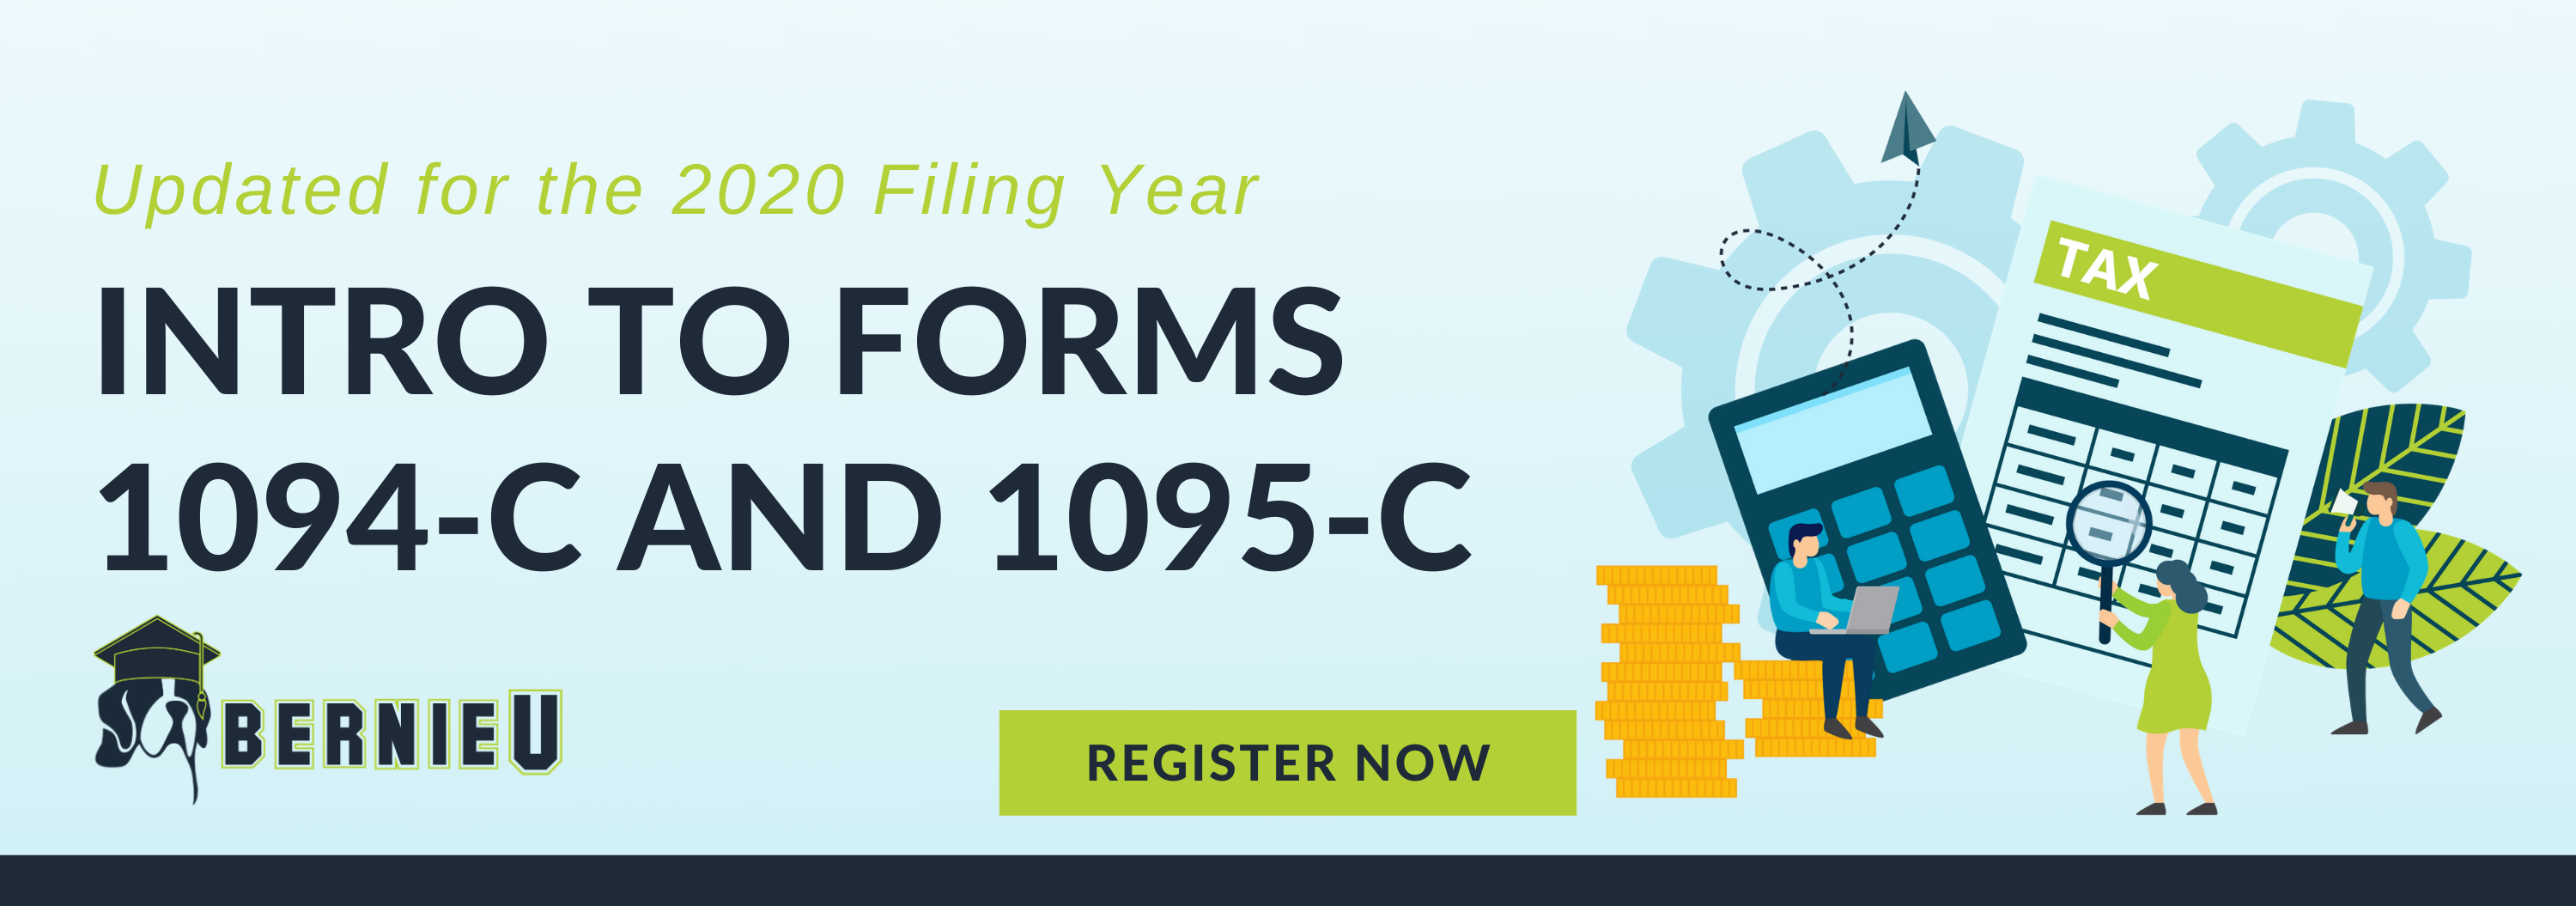 Irs Updates To New Form 1094 C And 1095 C Drafts Bernieportal